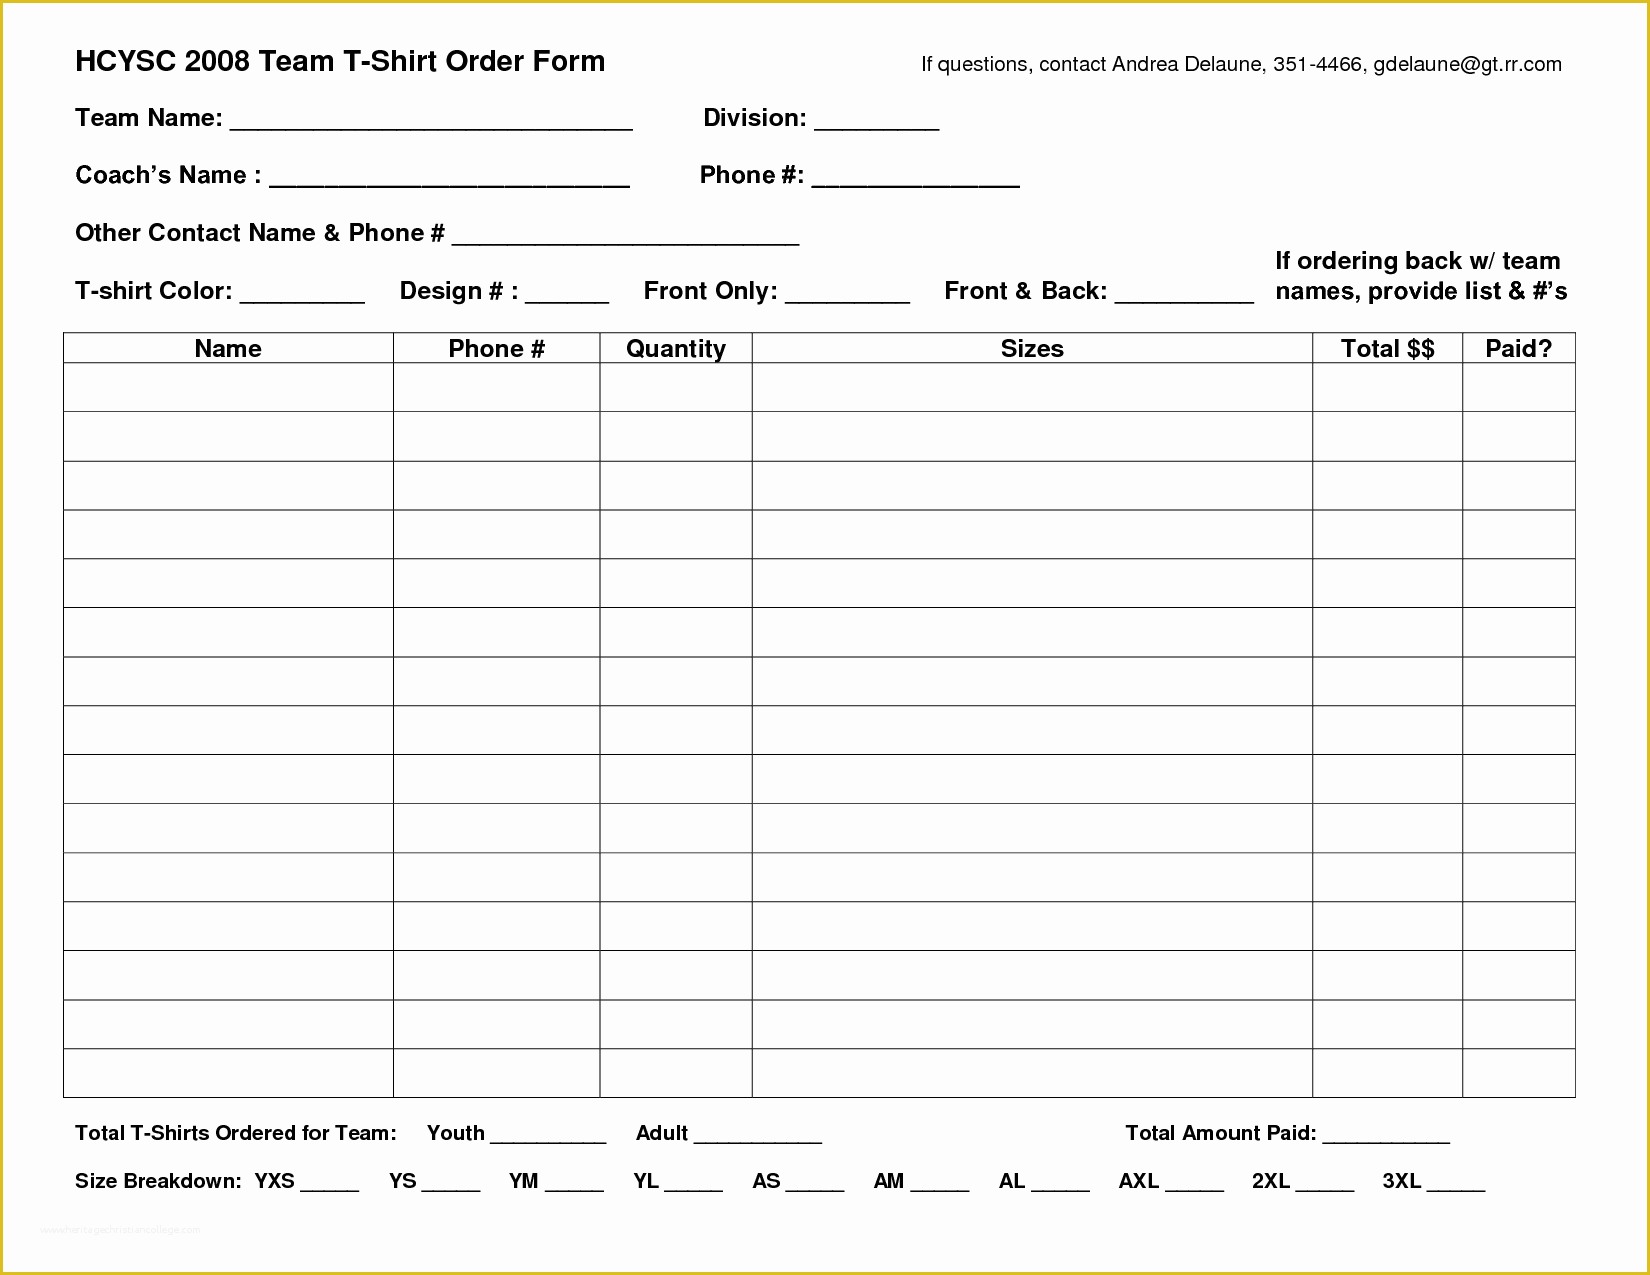 custom order forms with carbon copy